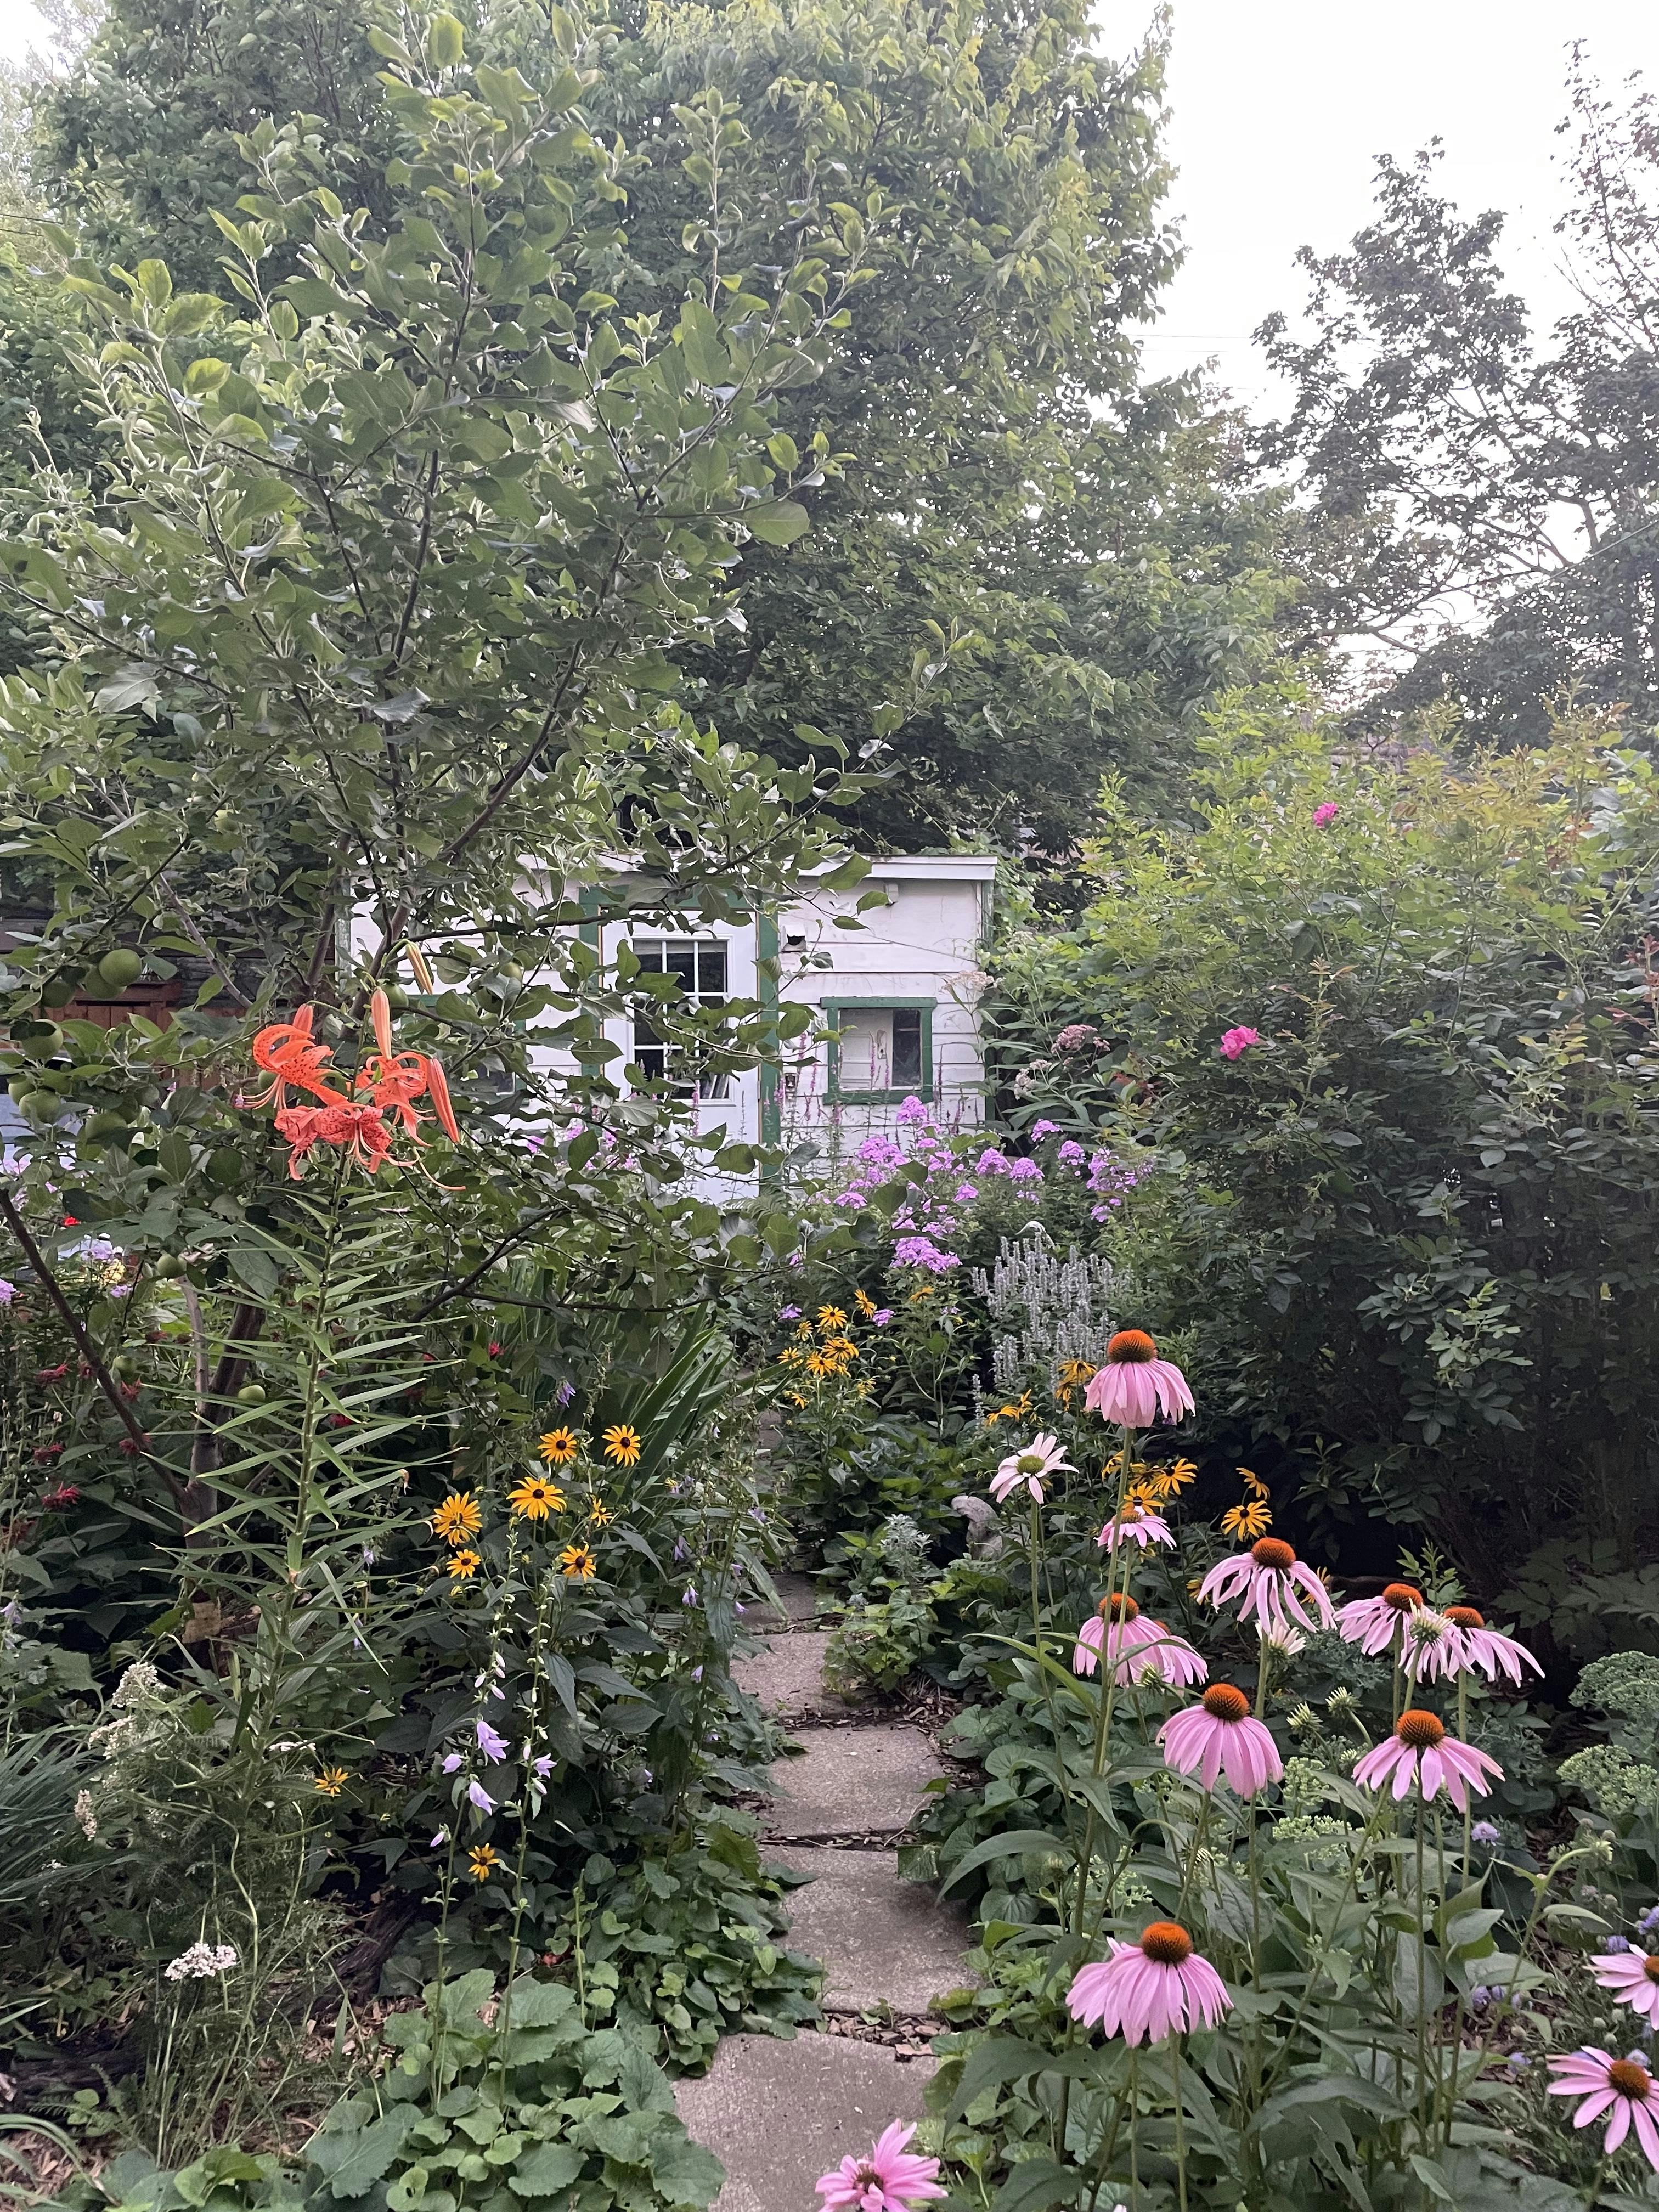 lush garden with flowers